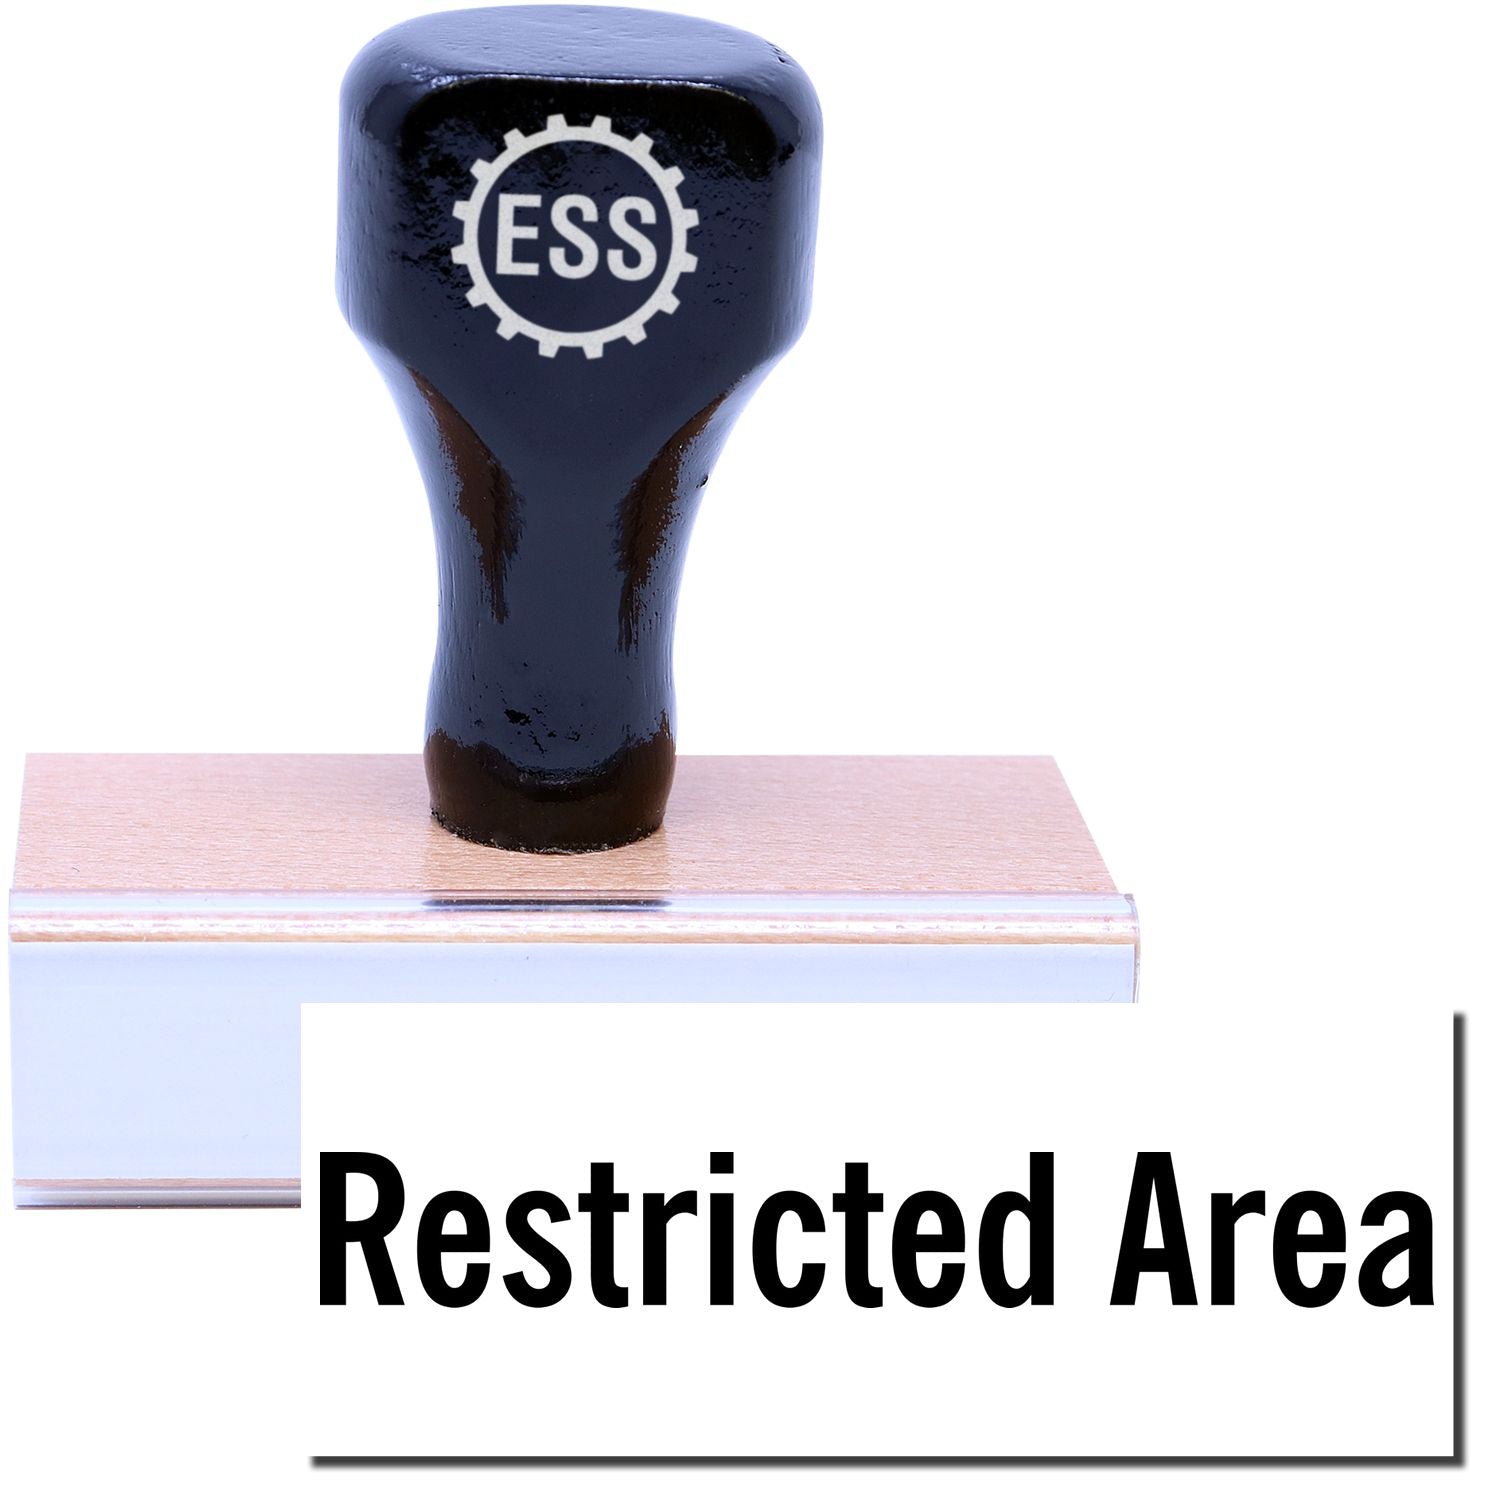 A stock office rubber stamp with a stamped image showing how the text "Restricted Area" is displayed after stamping.